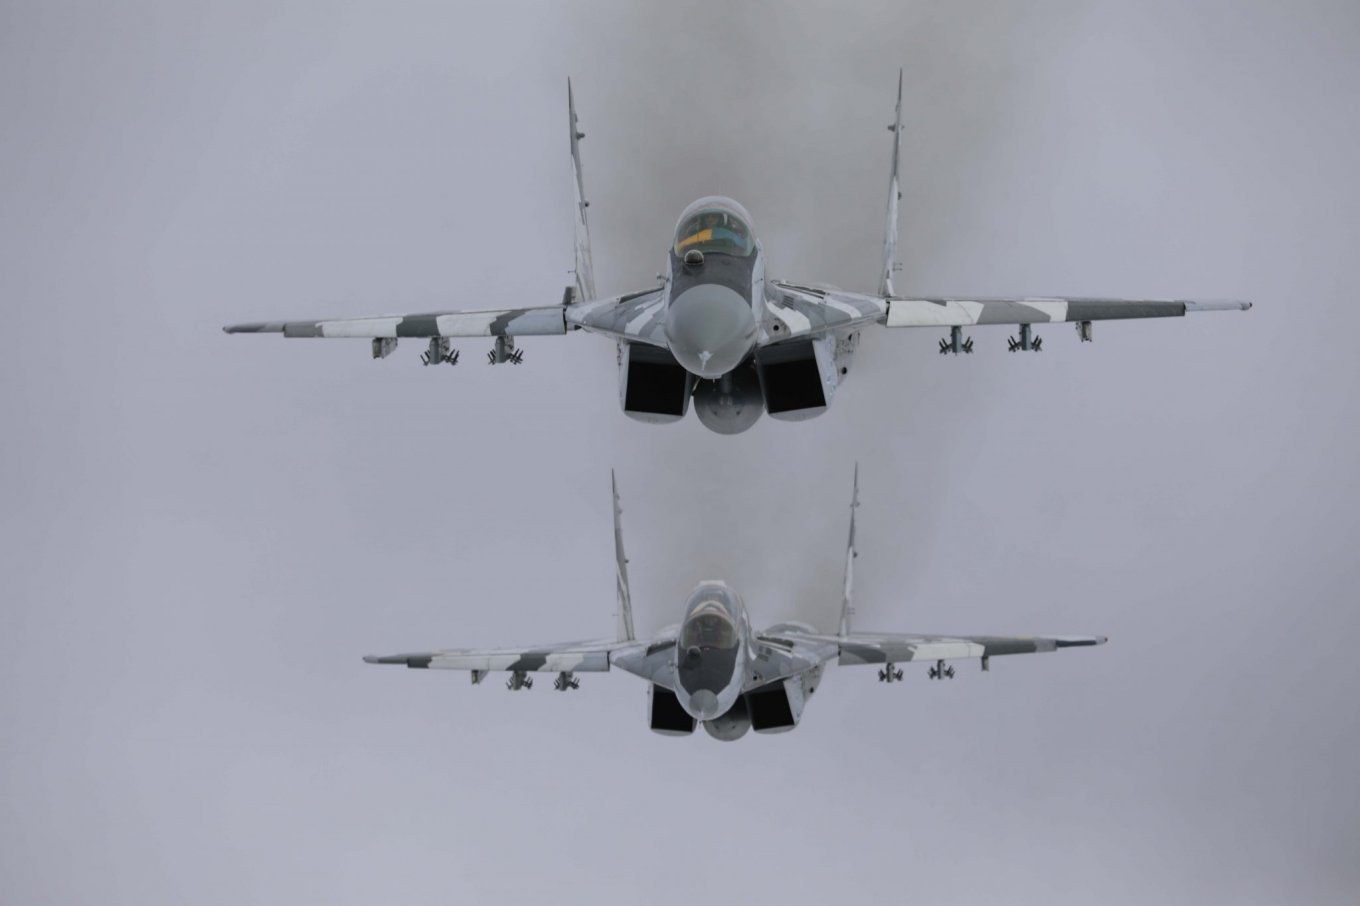 The MiG-29 is one of the main fighters of the Air Force of Ukraine, which needs to be replaced, Ukraine’s Air Force Hope Get F-16 Aircraft Instead of Create Something Like Iron Dome, Defense Express